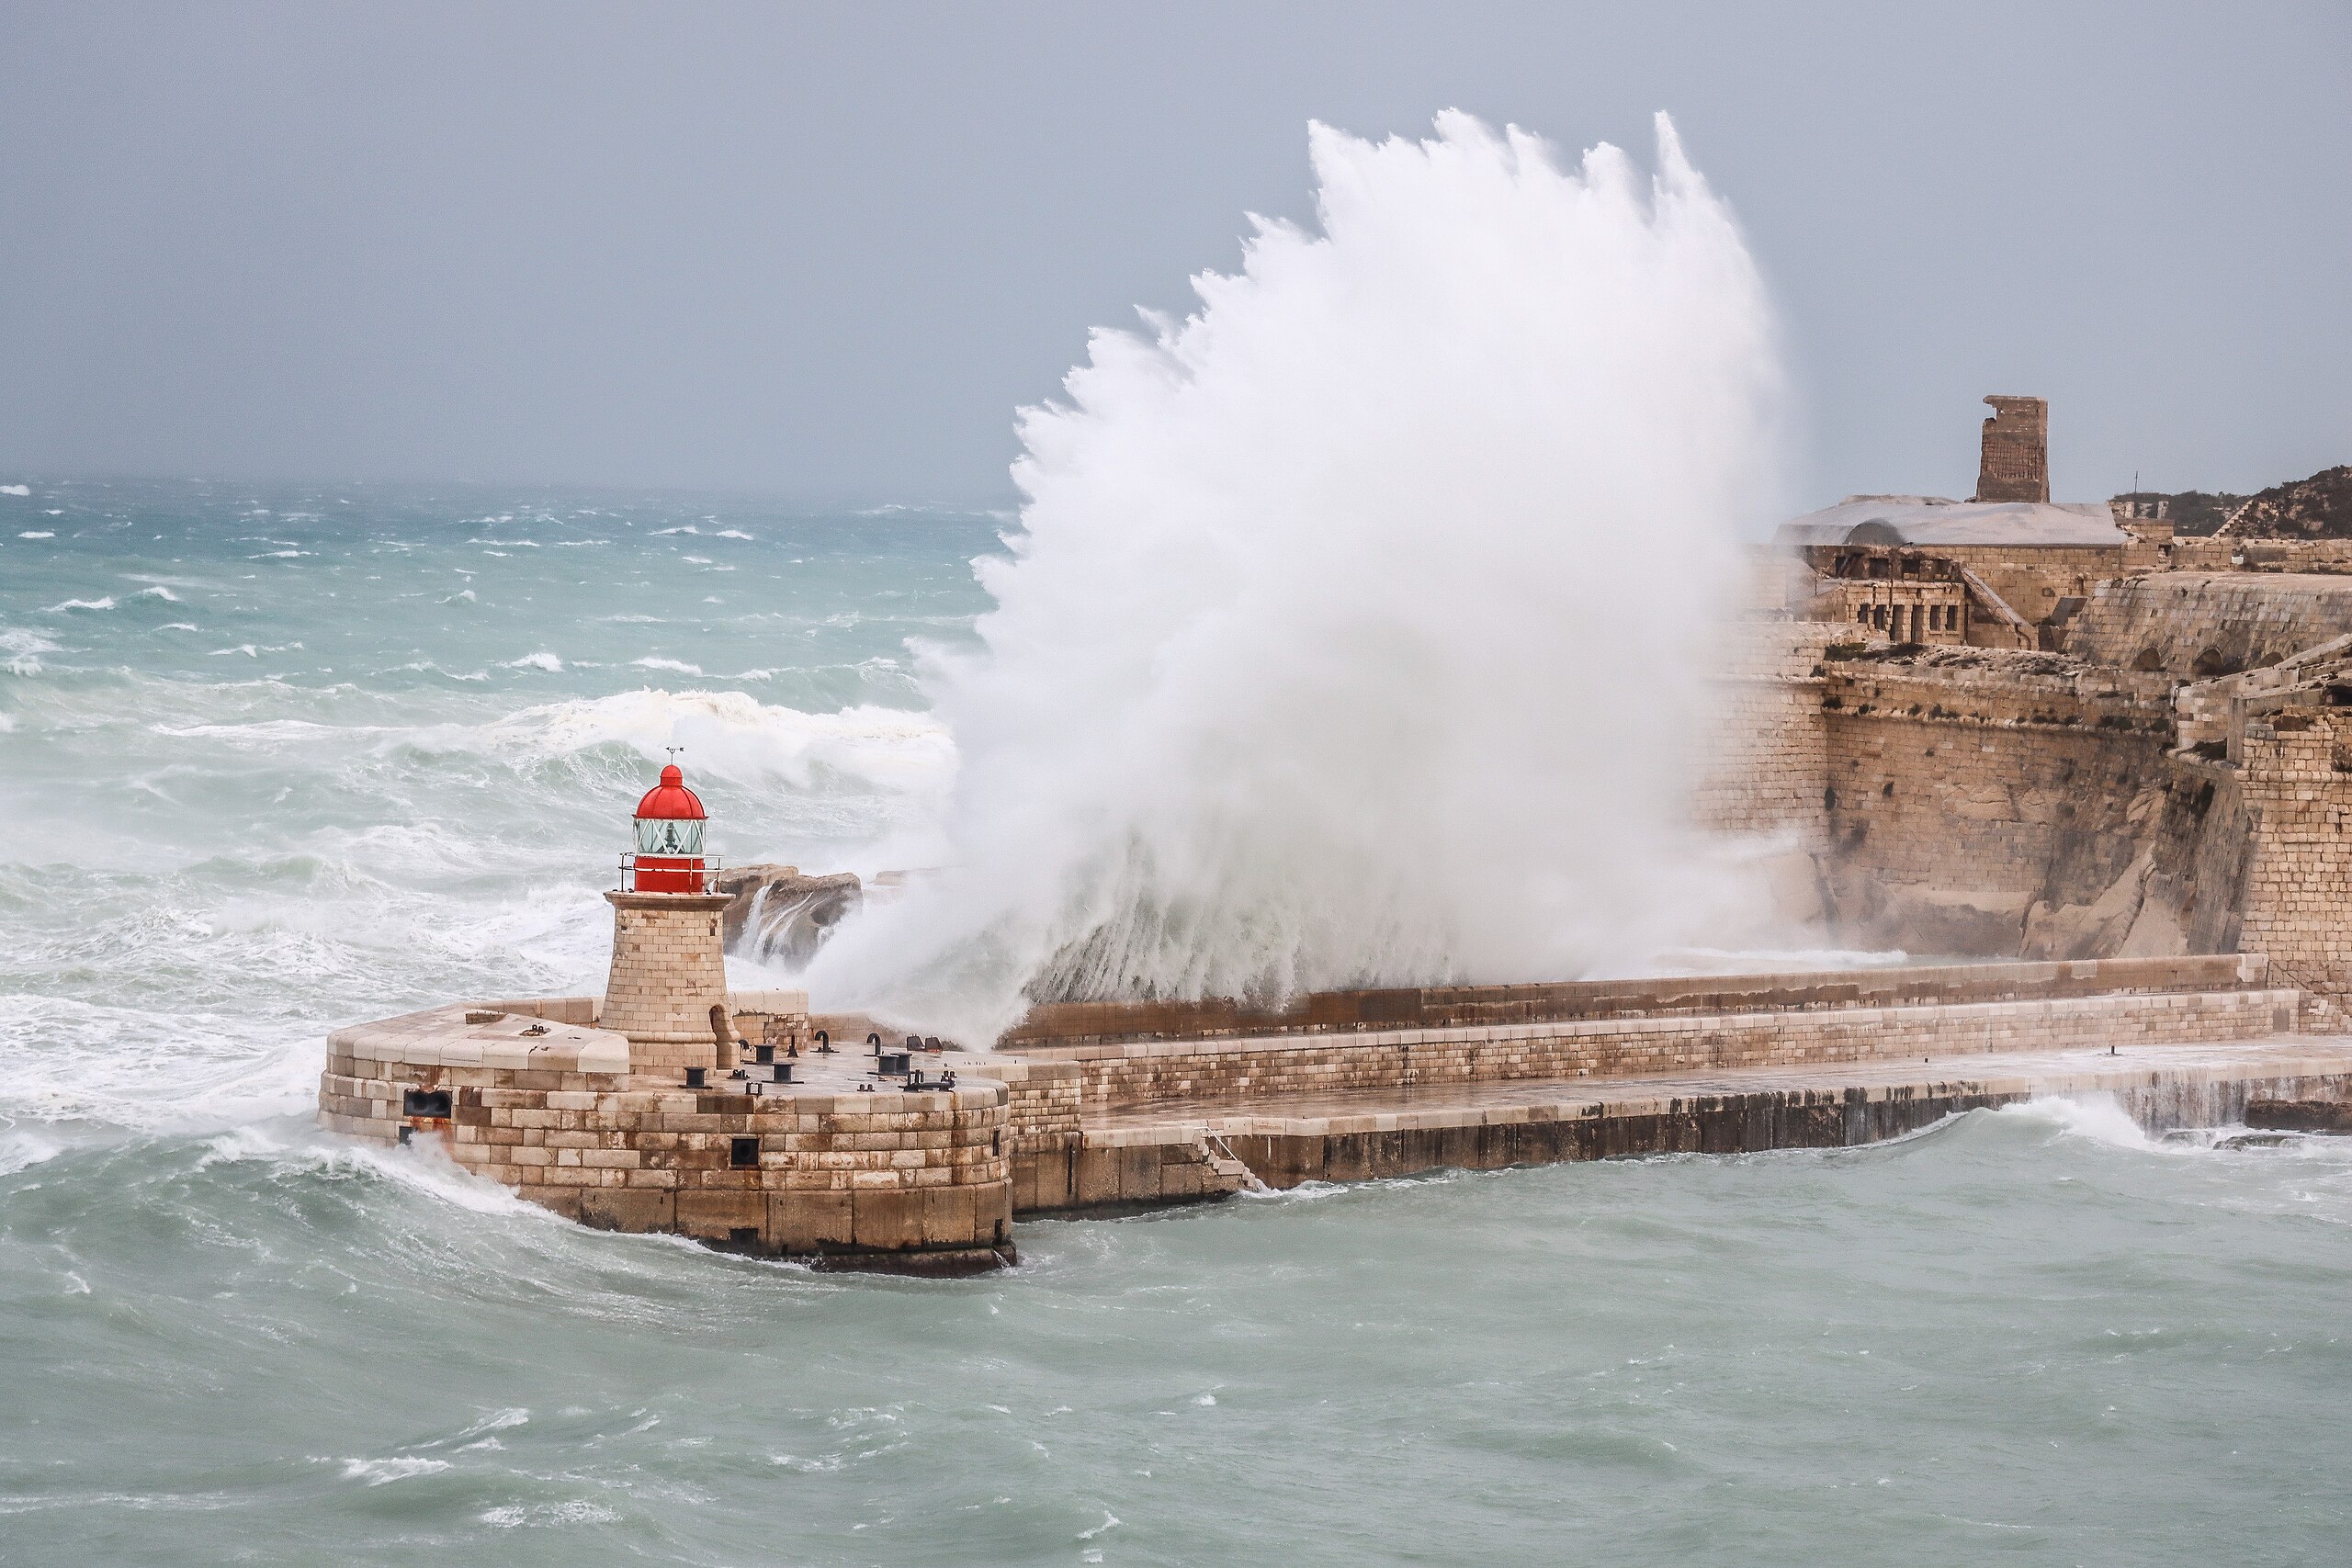 A huge wave hitting the breakwater at Fort Ricasoli, Malta